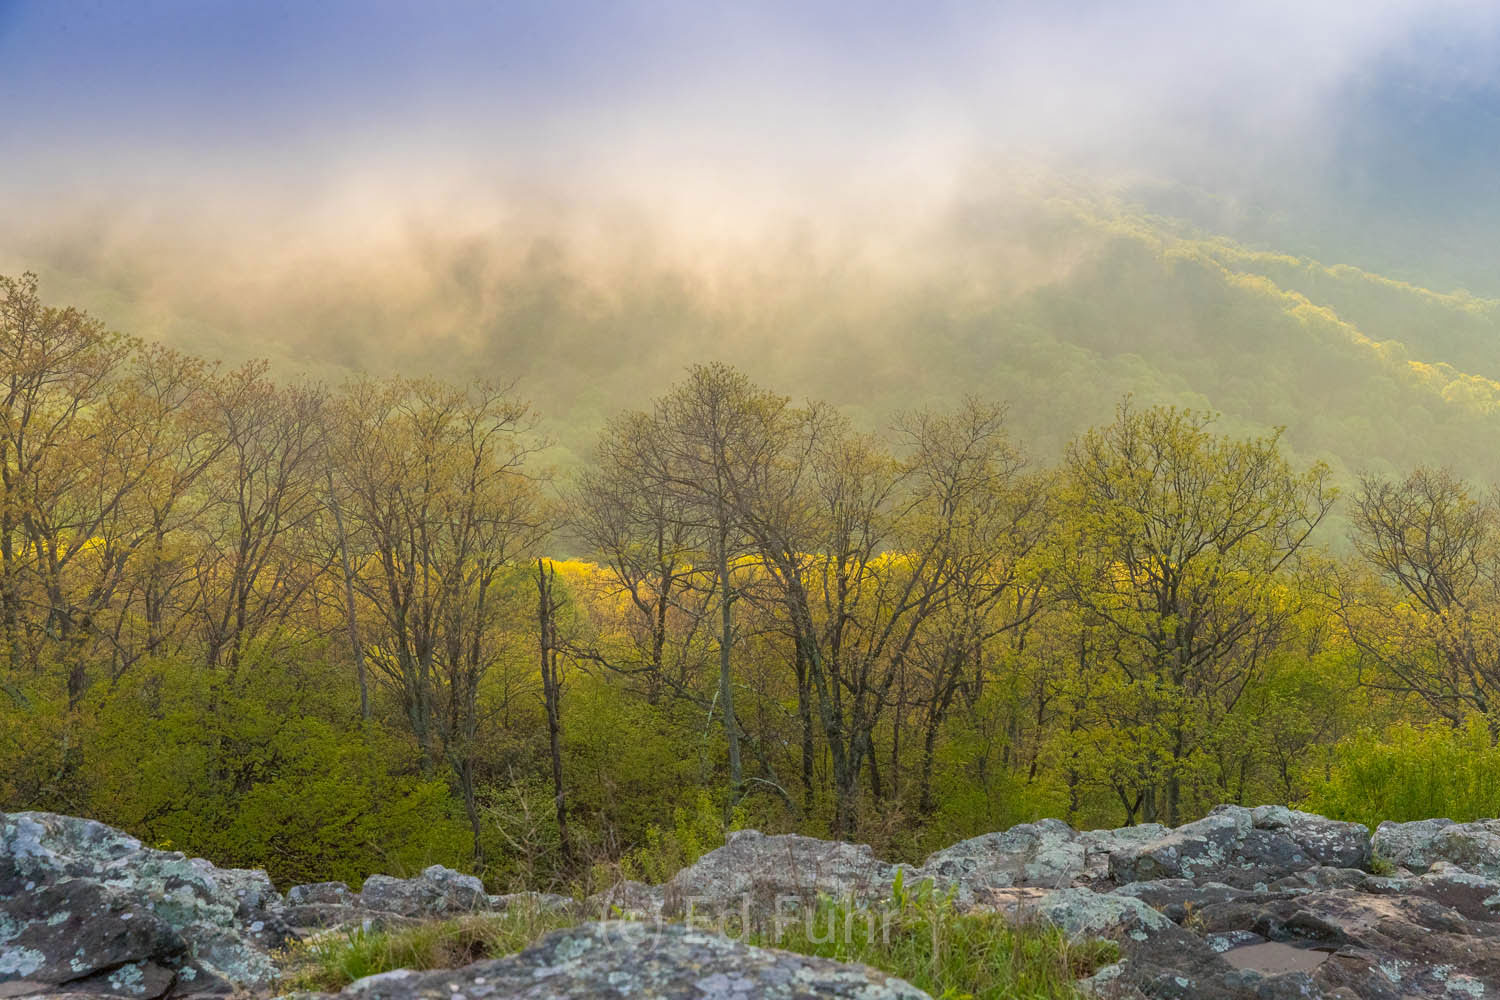 A spring fog and clouds give way over the cliffs on Shenandoah's west face.